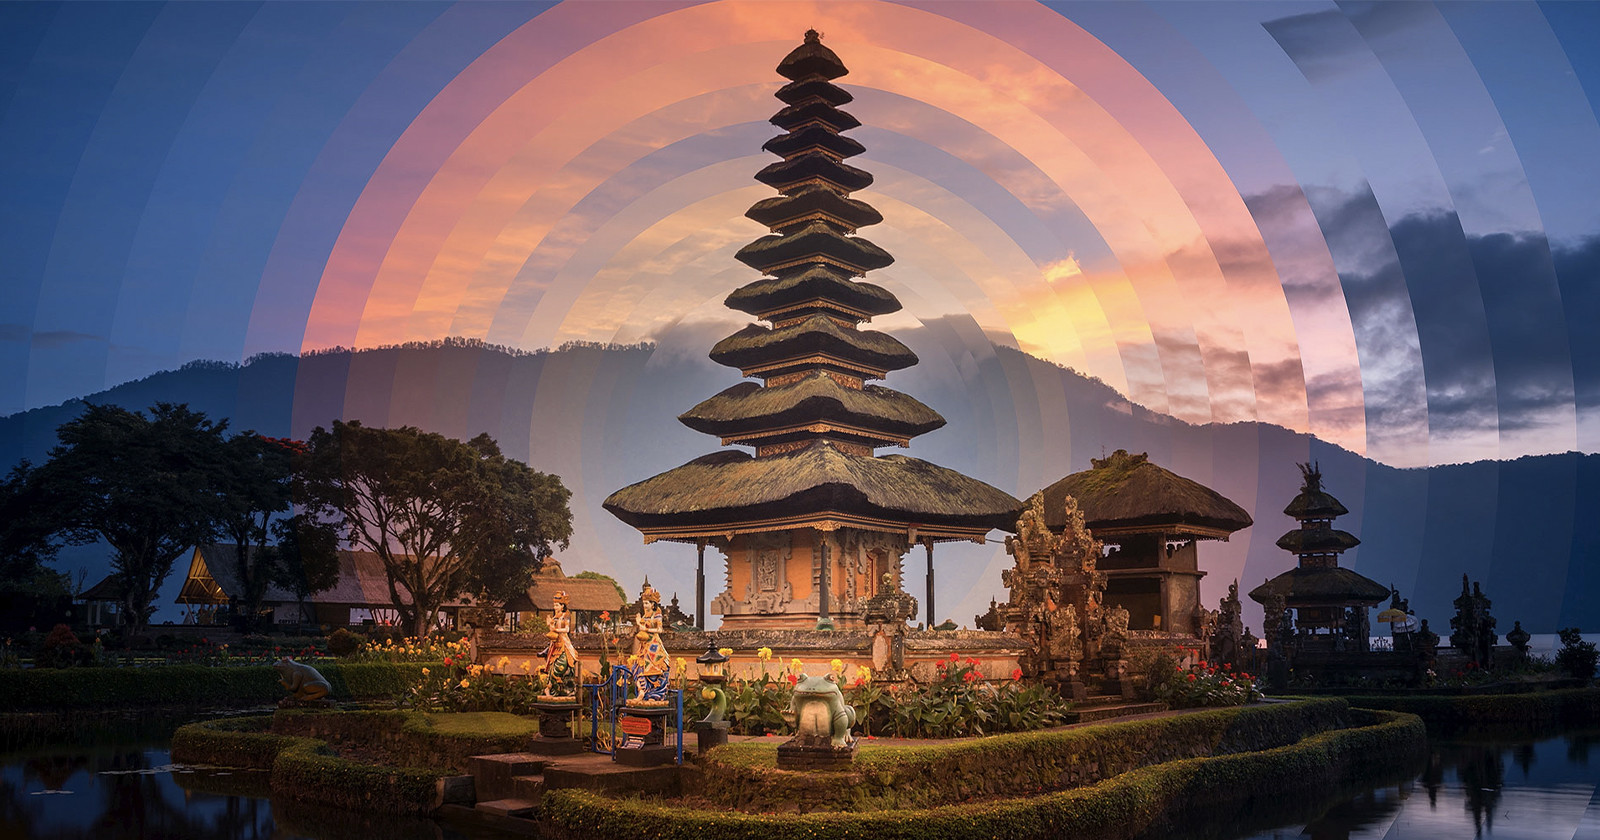 The Beauty of Bali in a Mesmerizing TimeSlice Timelapse